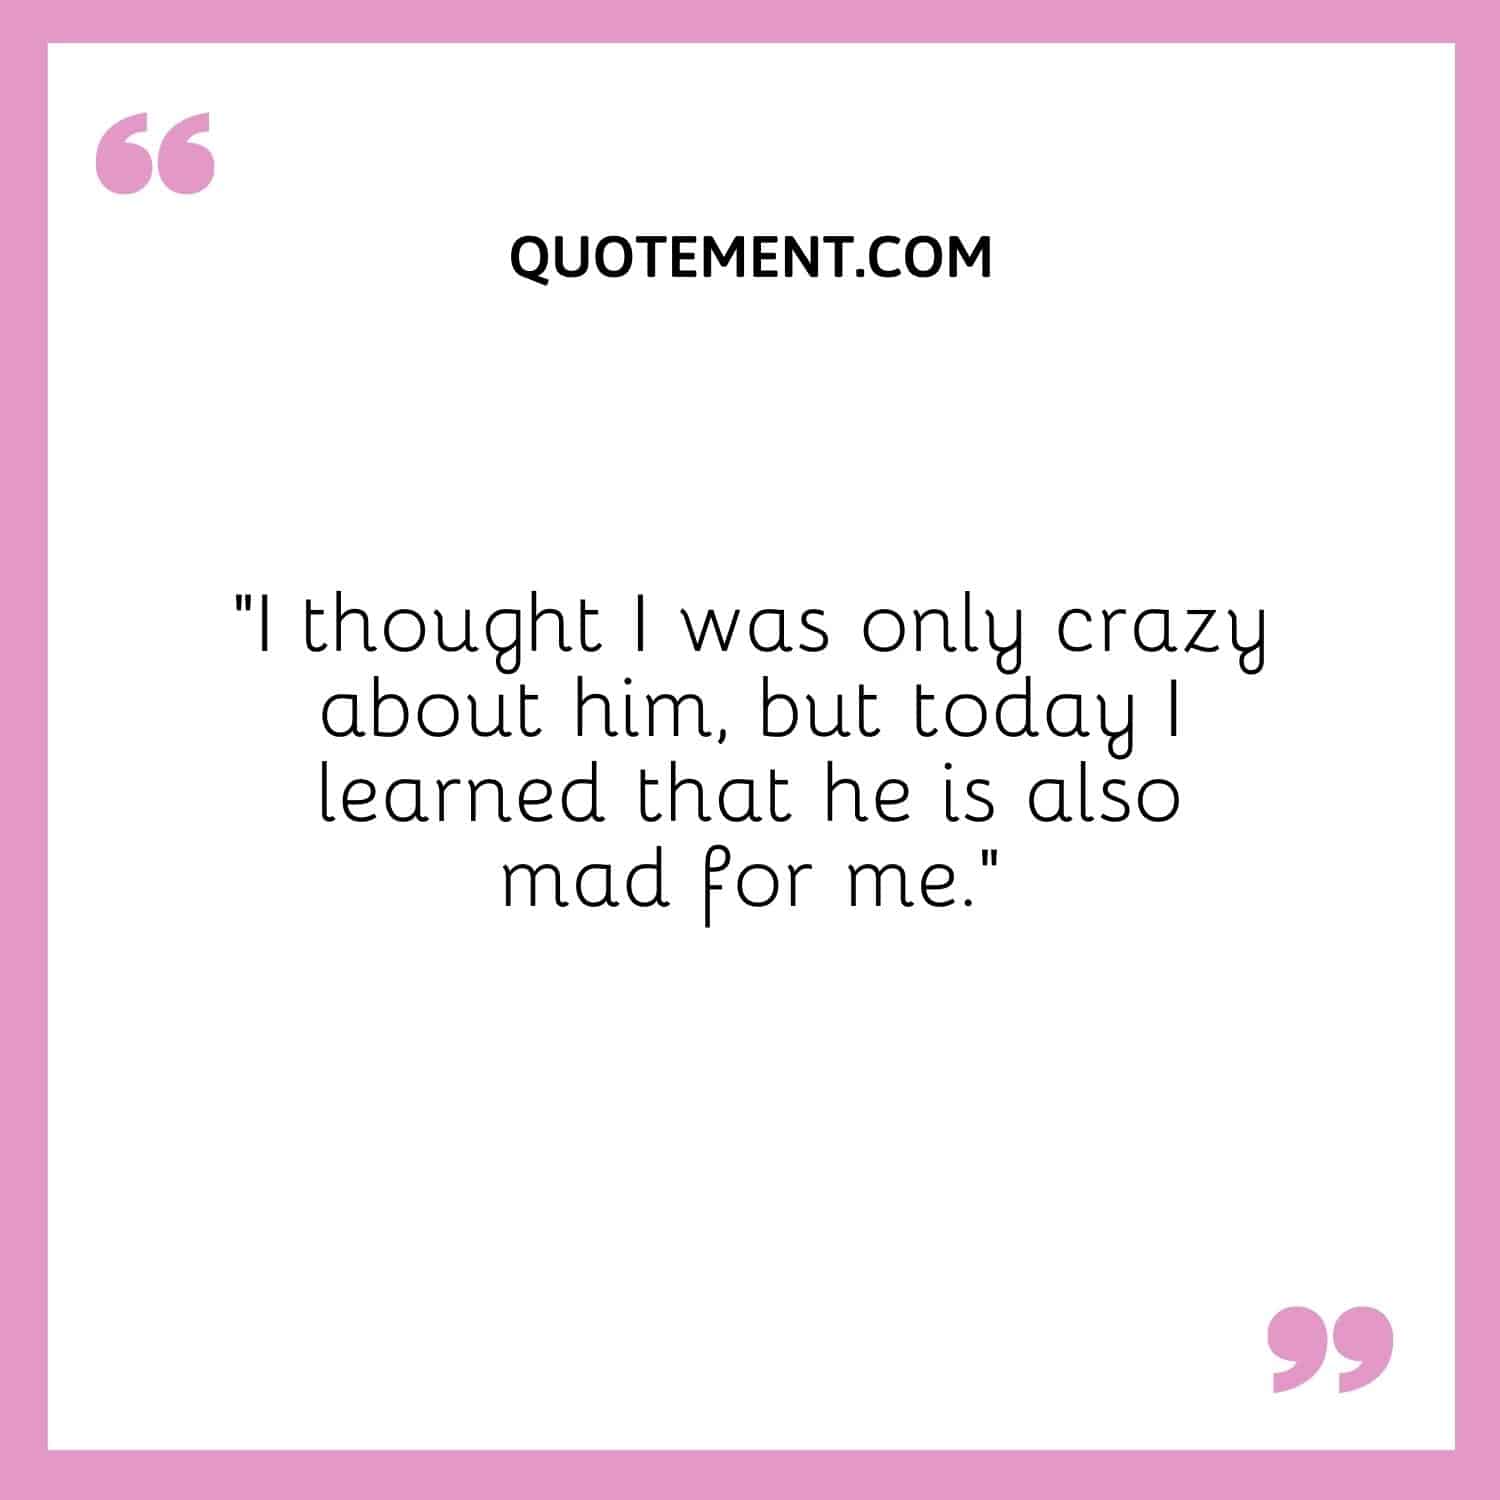 I learned that he is also mad for me